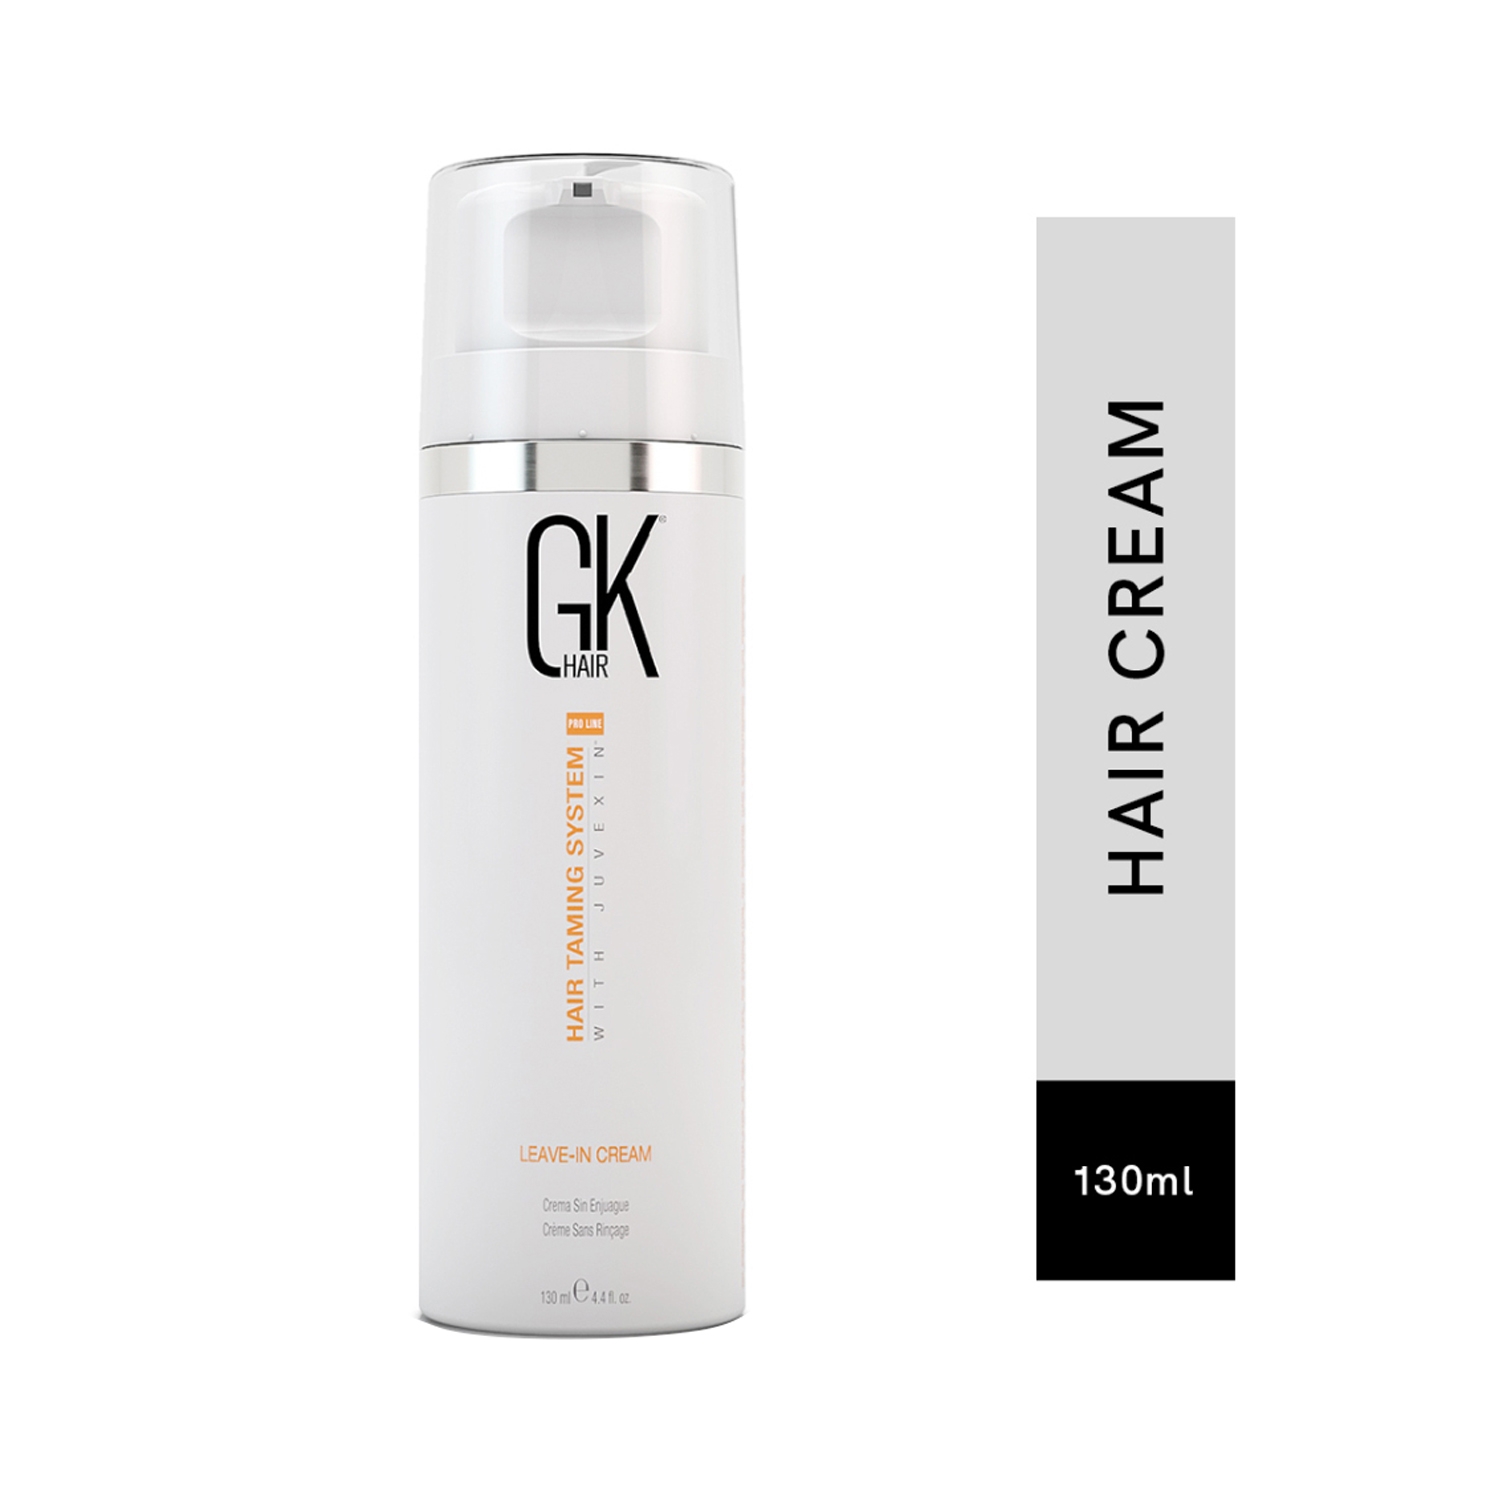 GK Hair | GK Hair Taming System Leave In Cream Conditioner (130ml)